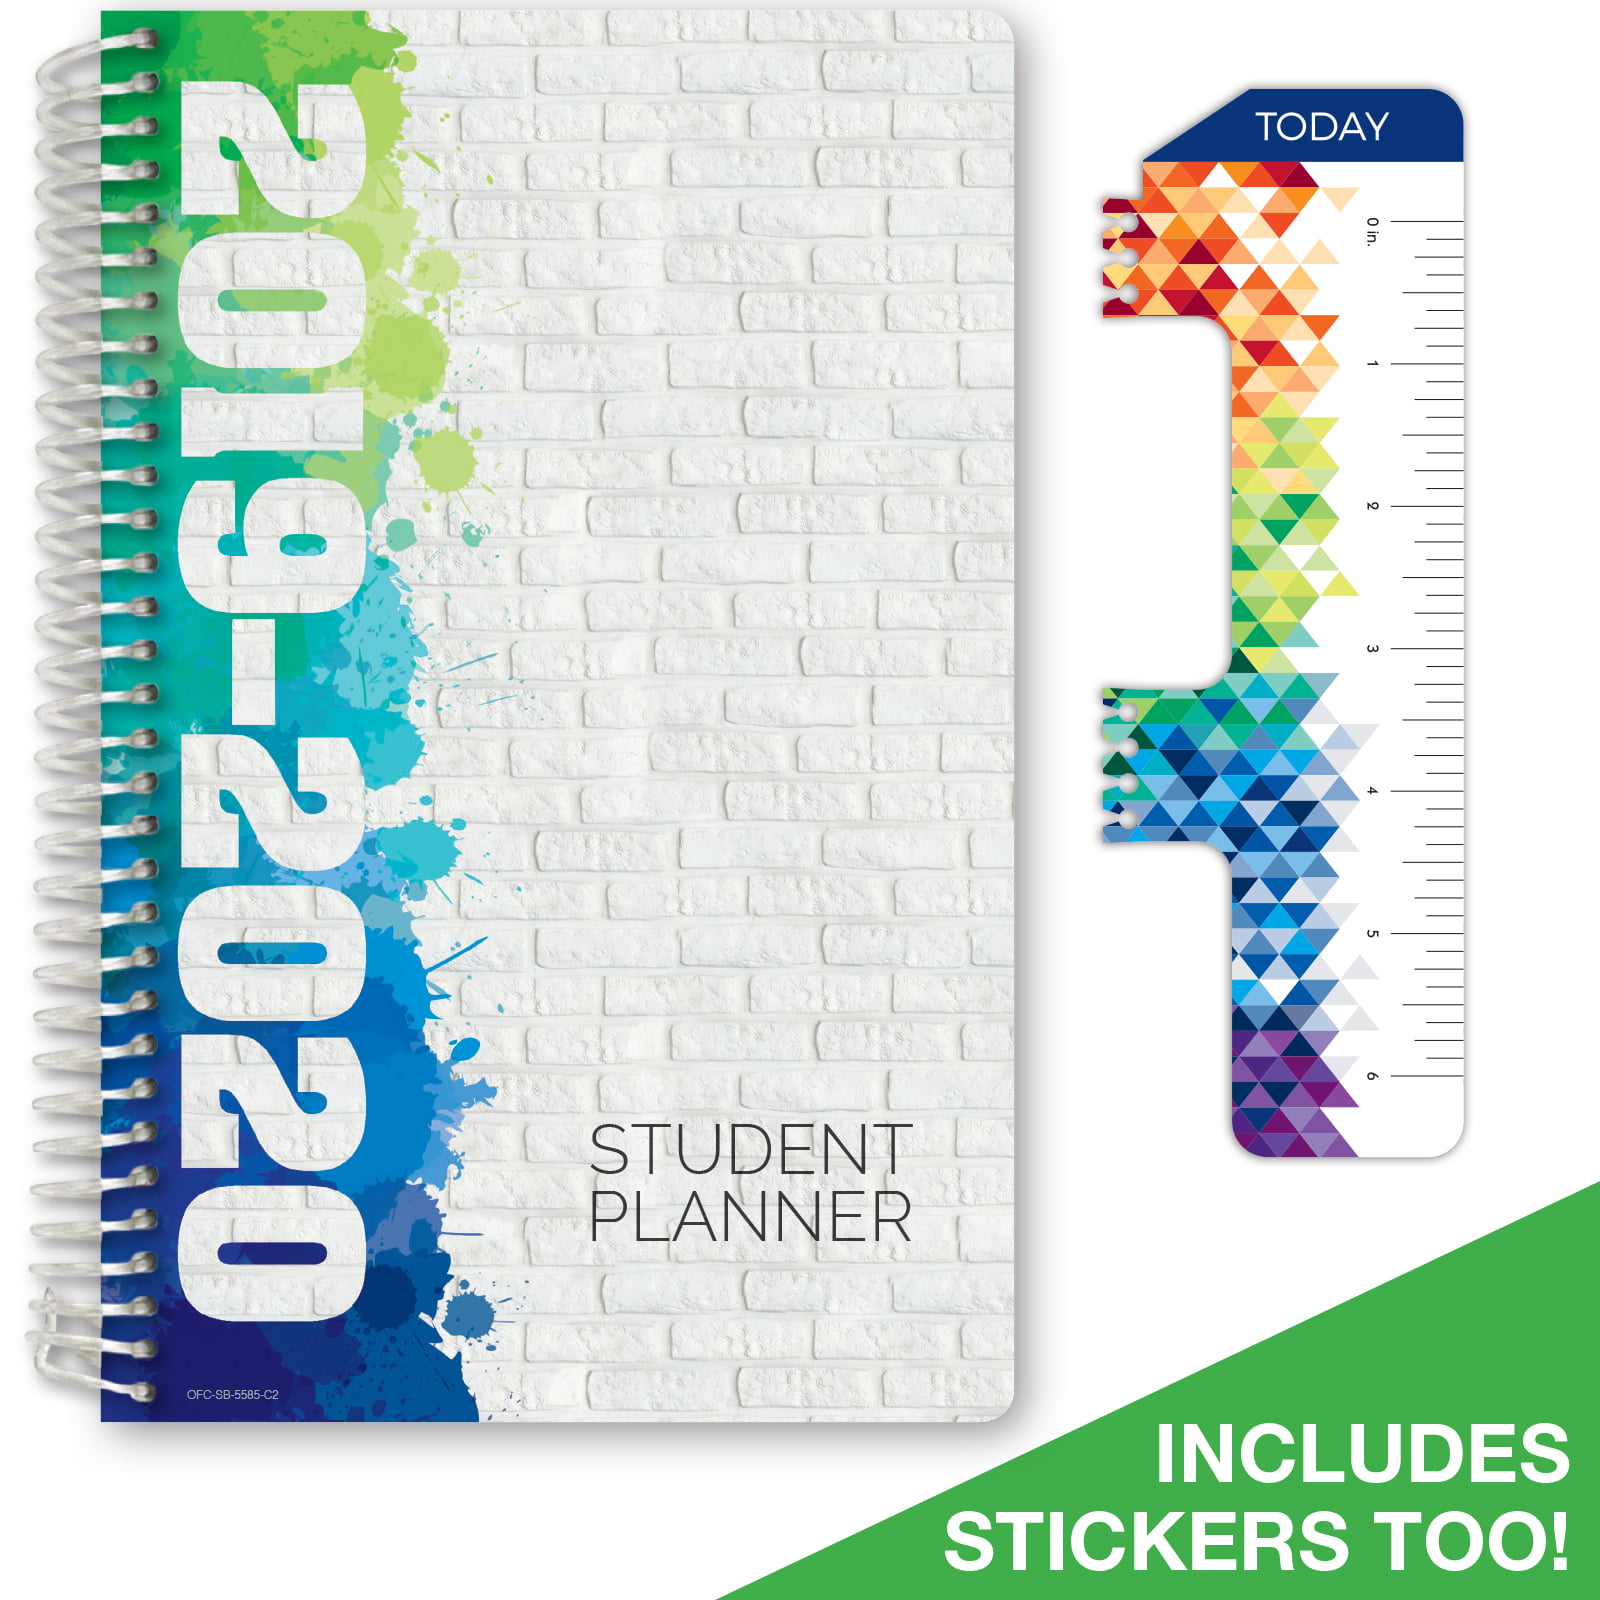 Mini Hardback Patterned Student Planner for 2020 Painted 